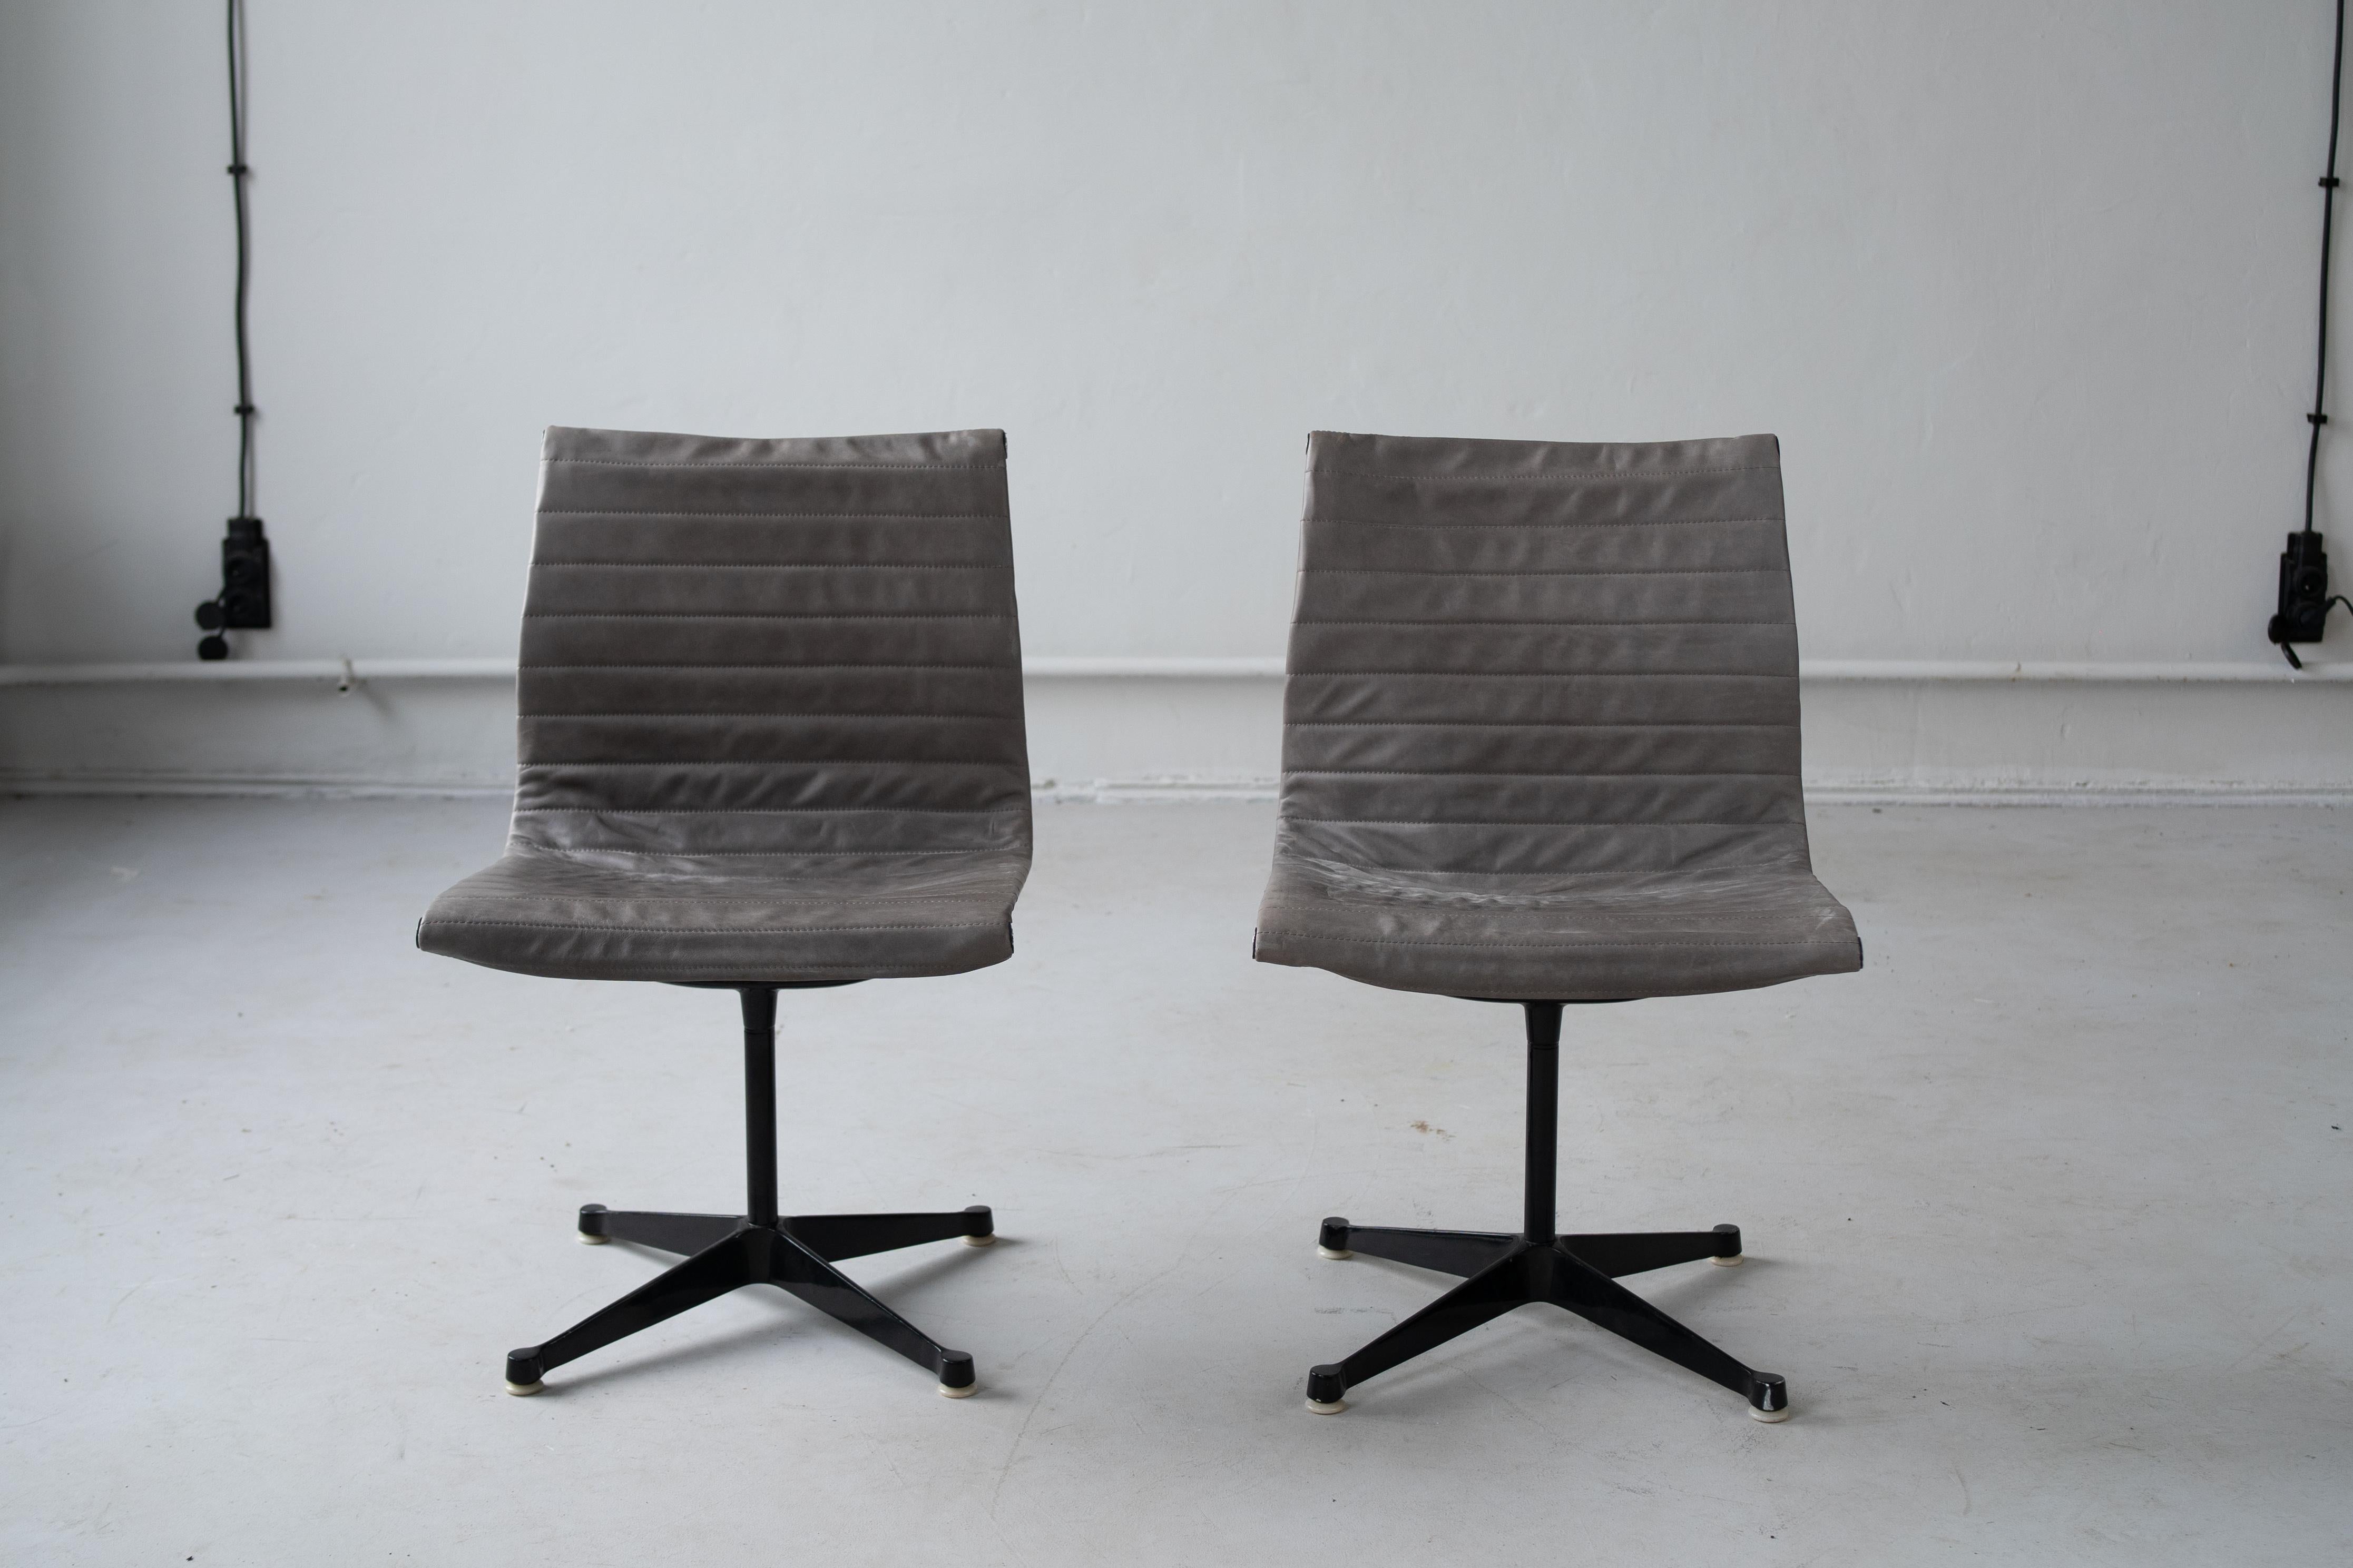 EA 116 chair designed by Charles and Ray Eames, in the late 50s.
Blach steel teggs and grey leather upholstery.
Functional , strong and elegant. 
A set of 2 chairs